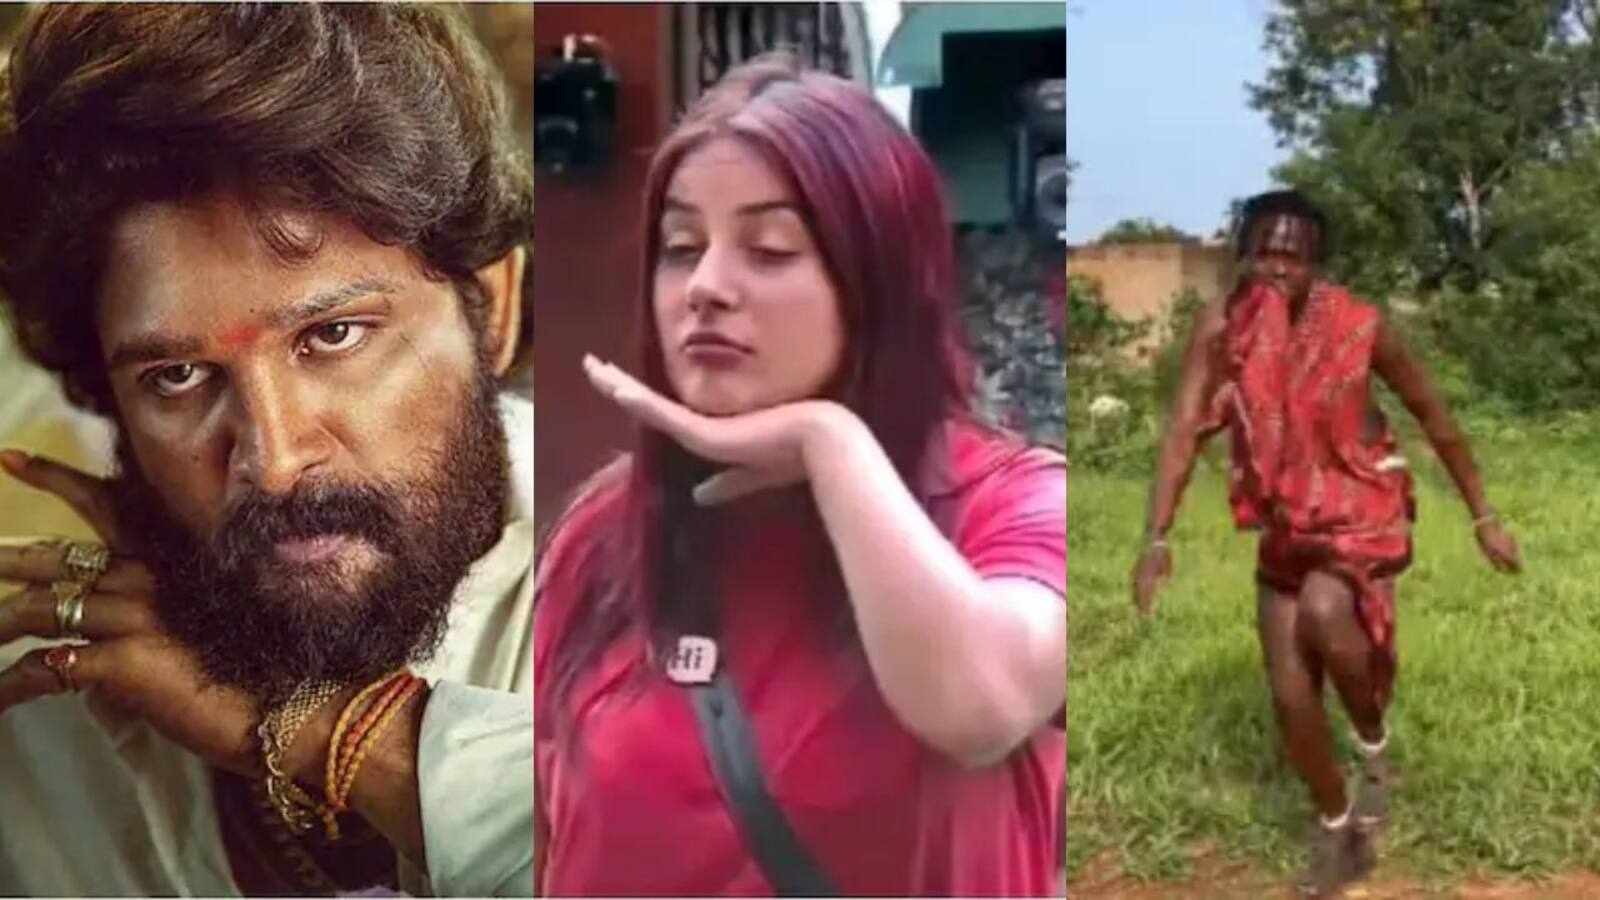 Trending South News Today: Allu Arjun’s Pushpa hand gesture inspired by Shehnaaz Gill, Kili Paul’s new reel on Saami Saami and more